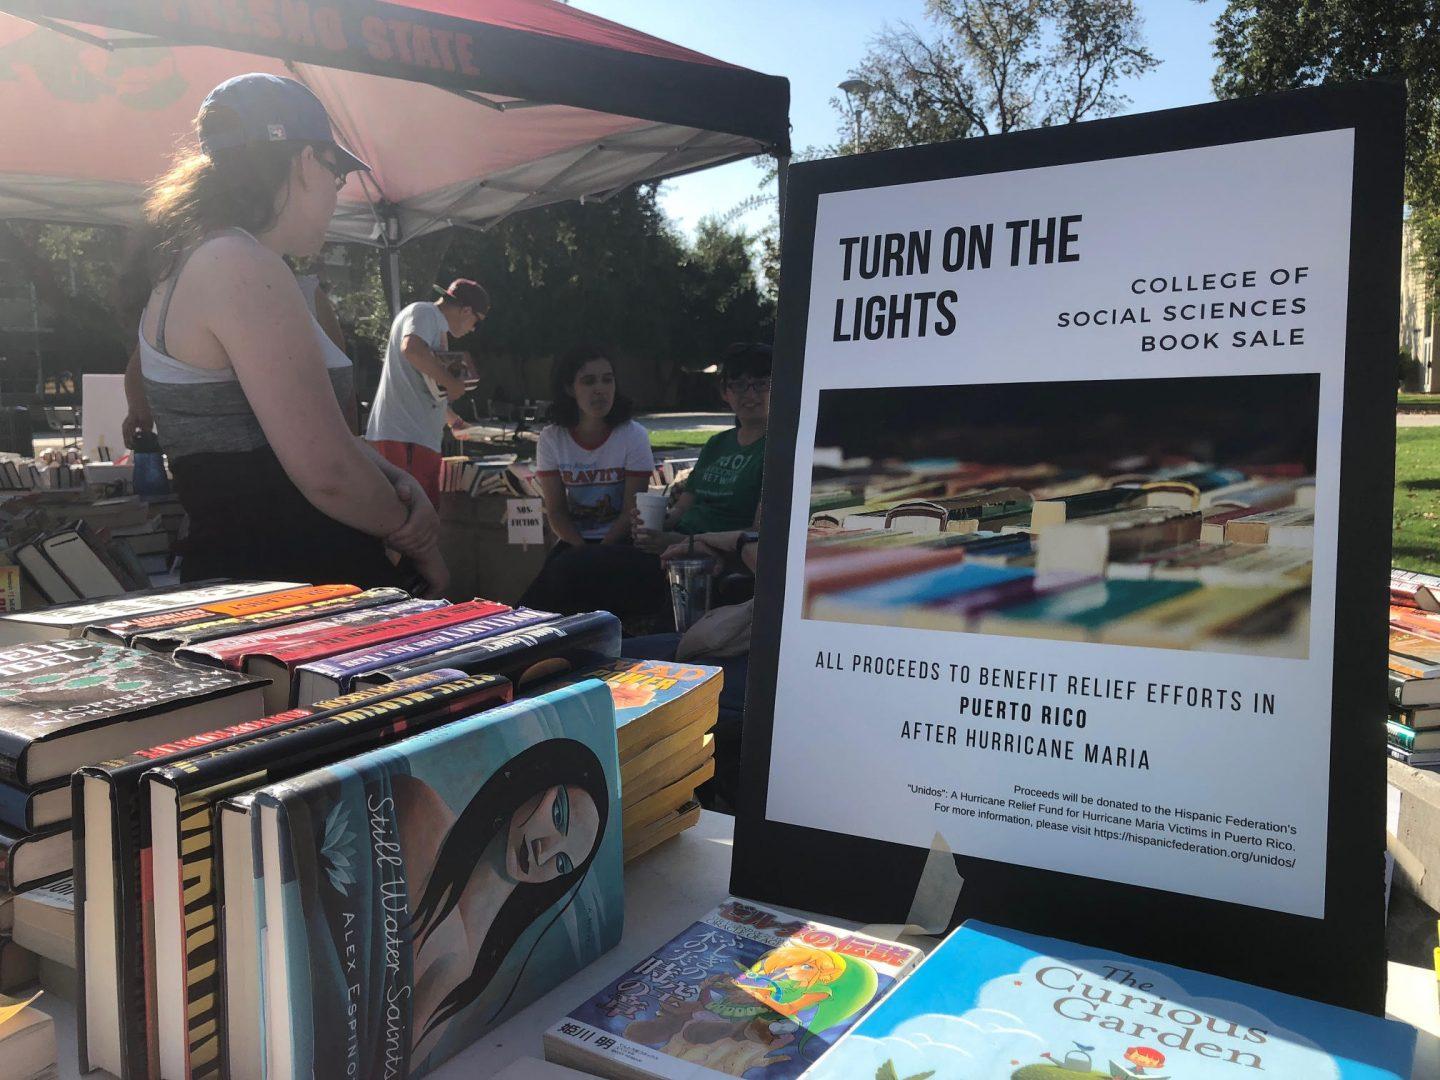 The College of Social Sciences held a book sale to benefit the hurricane victims of Puerto Rico on Oct. 27, 2017, at the Social Sciences Quad. (Jessica Johnson/The Collegian)